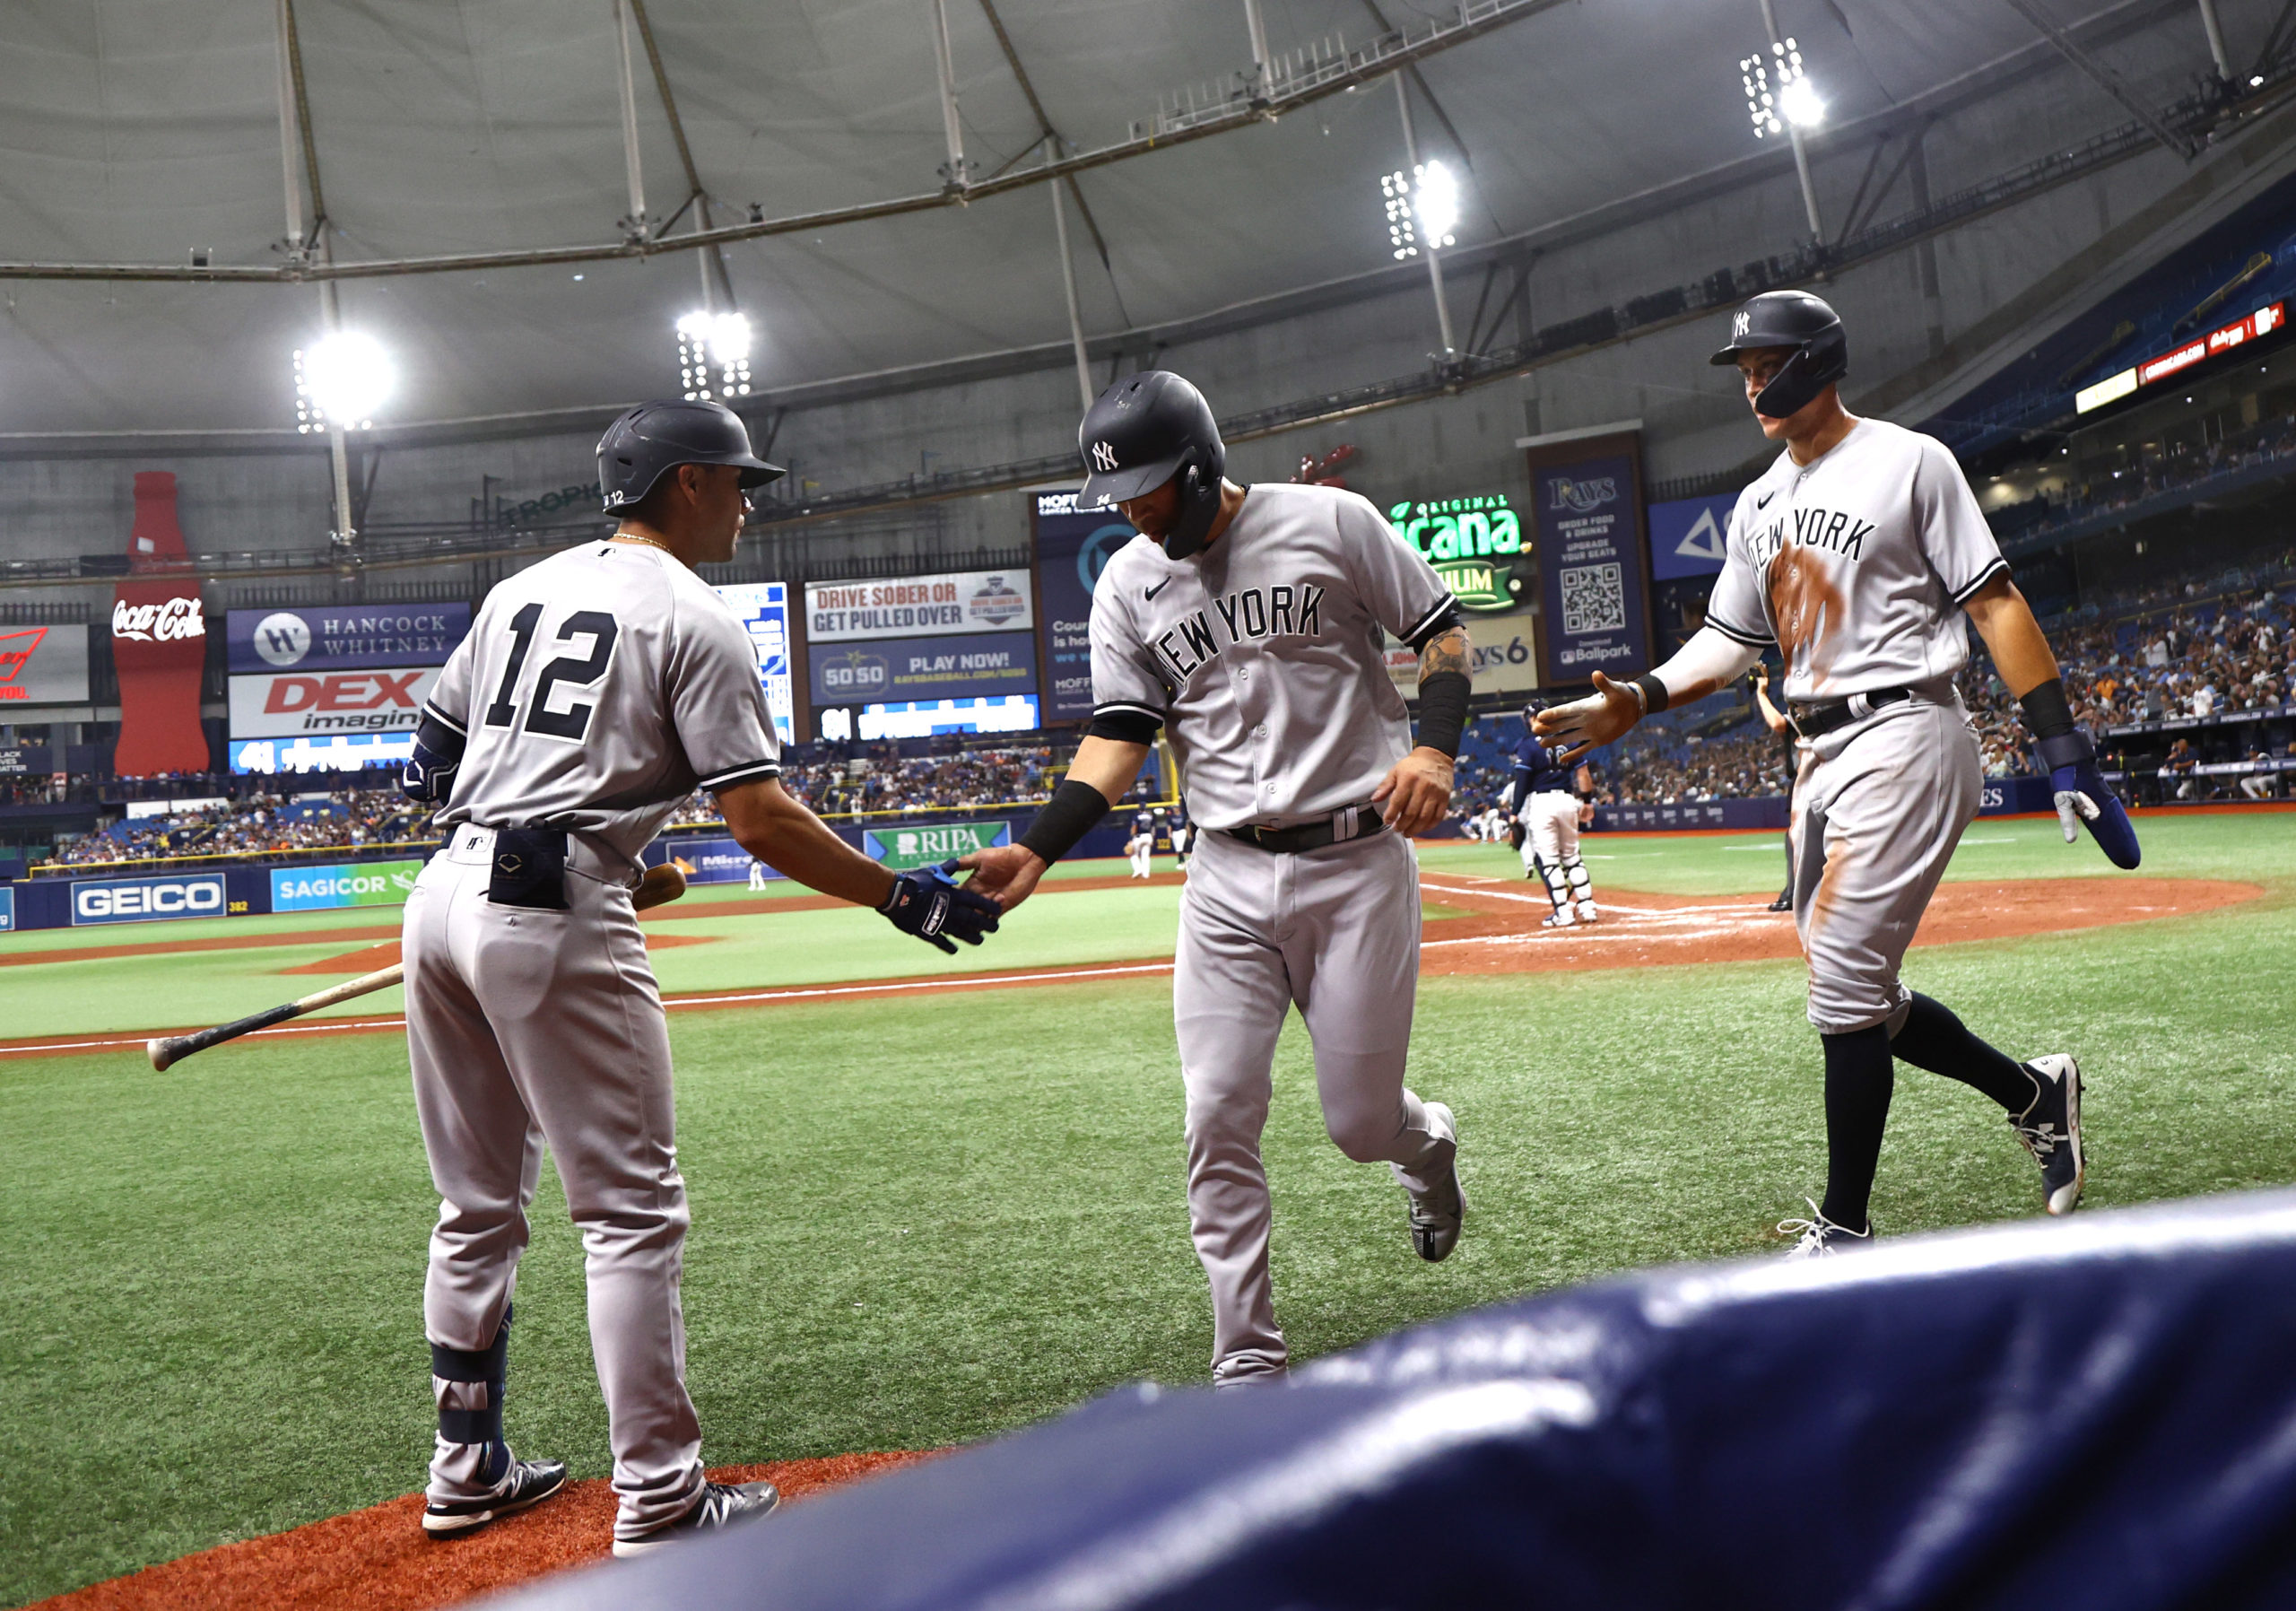 May 26, 2022; St. Petersburg, Florida, USA;  New York Yankees third baseman Marwin Gonzalez (14) and right fielder Aaron Judge (99) are congratulated by shortstop Isiah Kiner-Falefa (12) after scoring during the sixth inning against the Tampa Bay Rays at Tropicana Field. Mandatory Credit: Kim Klement-USA TODAY Sports